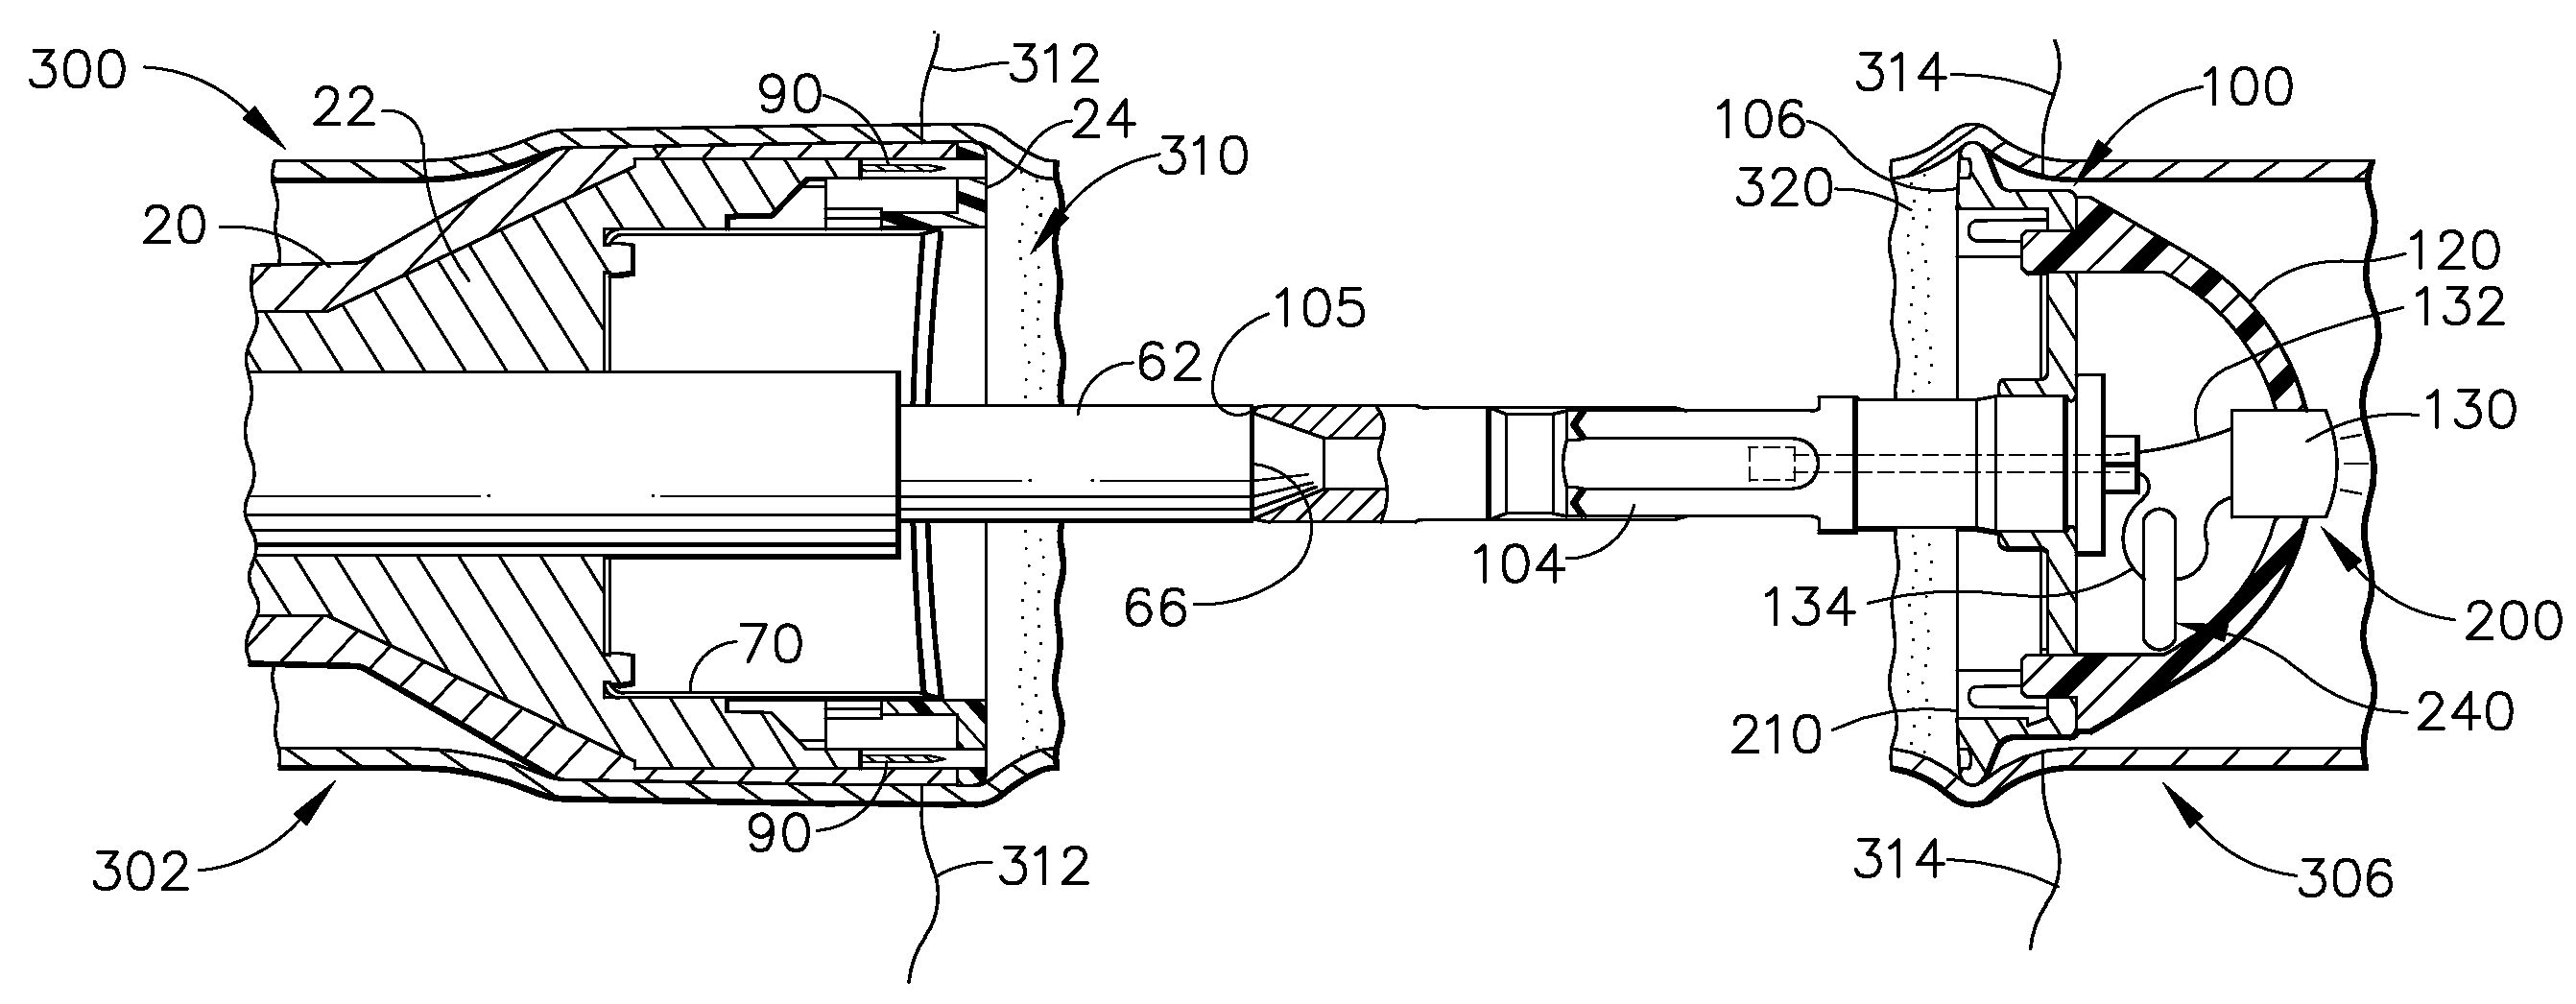 Surgical stapling instrument with apparatus for providing anvil position feedback